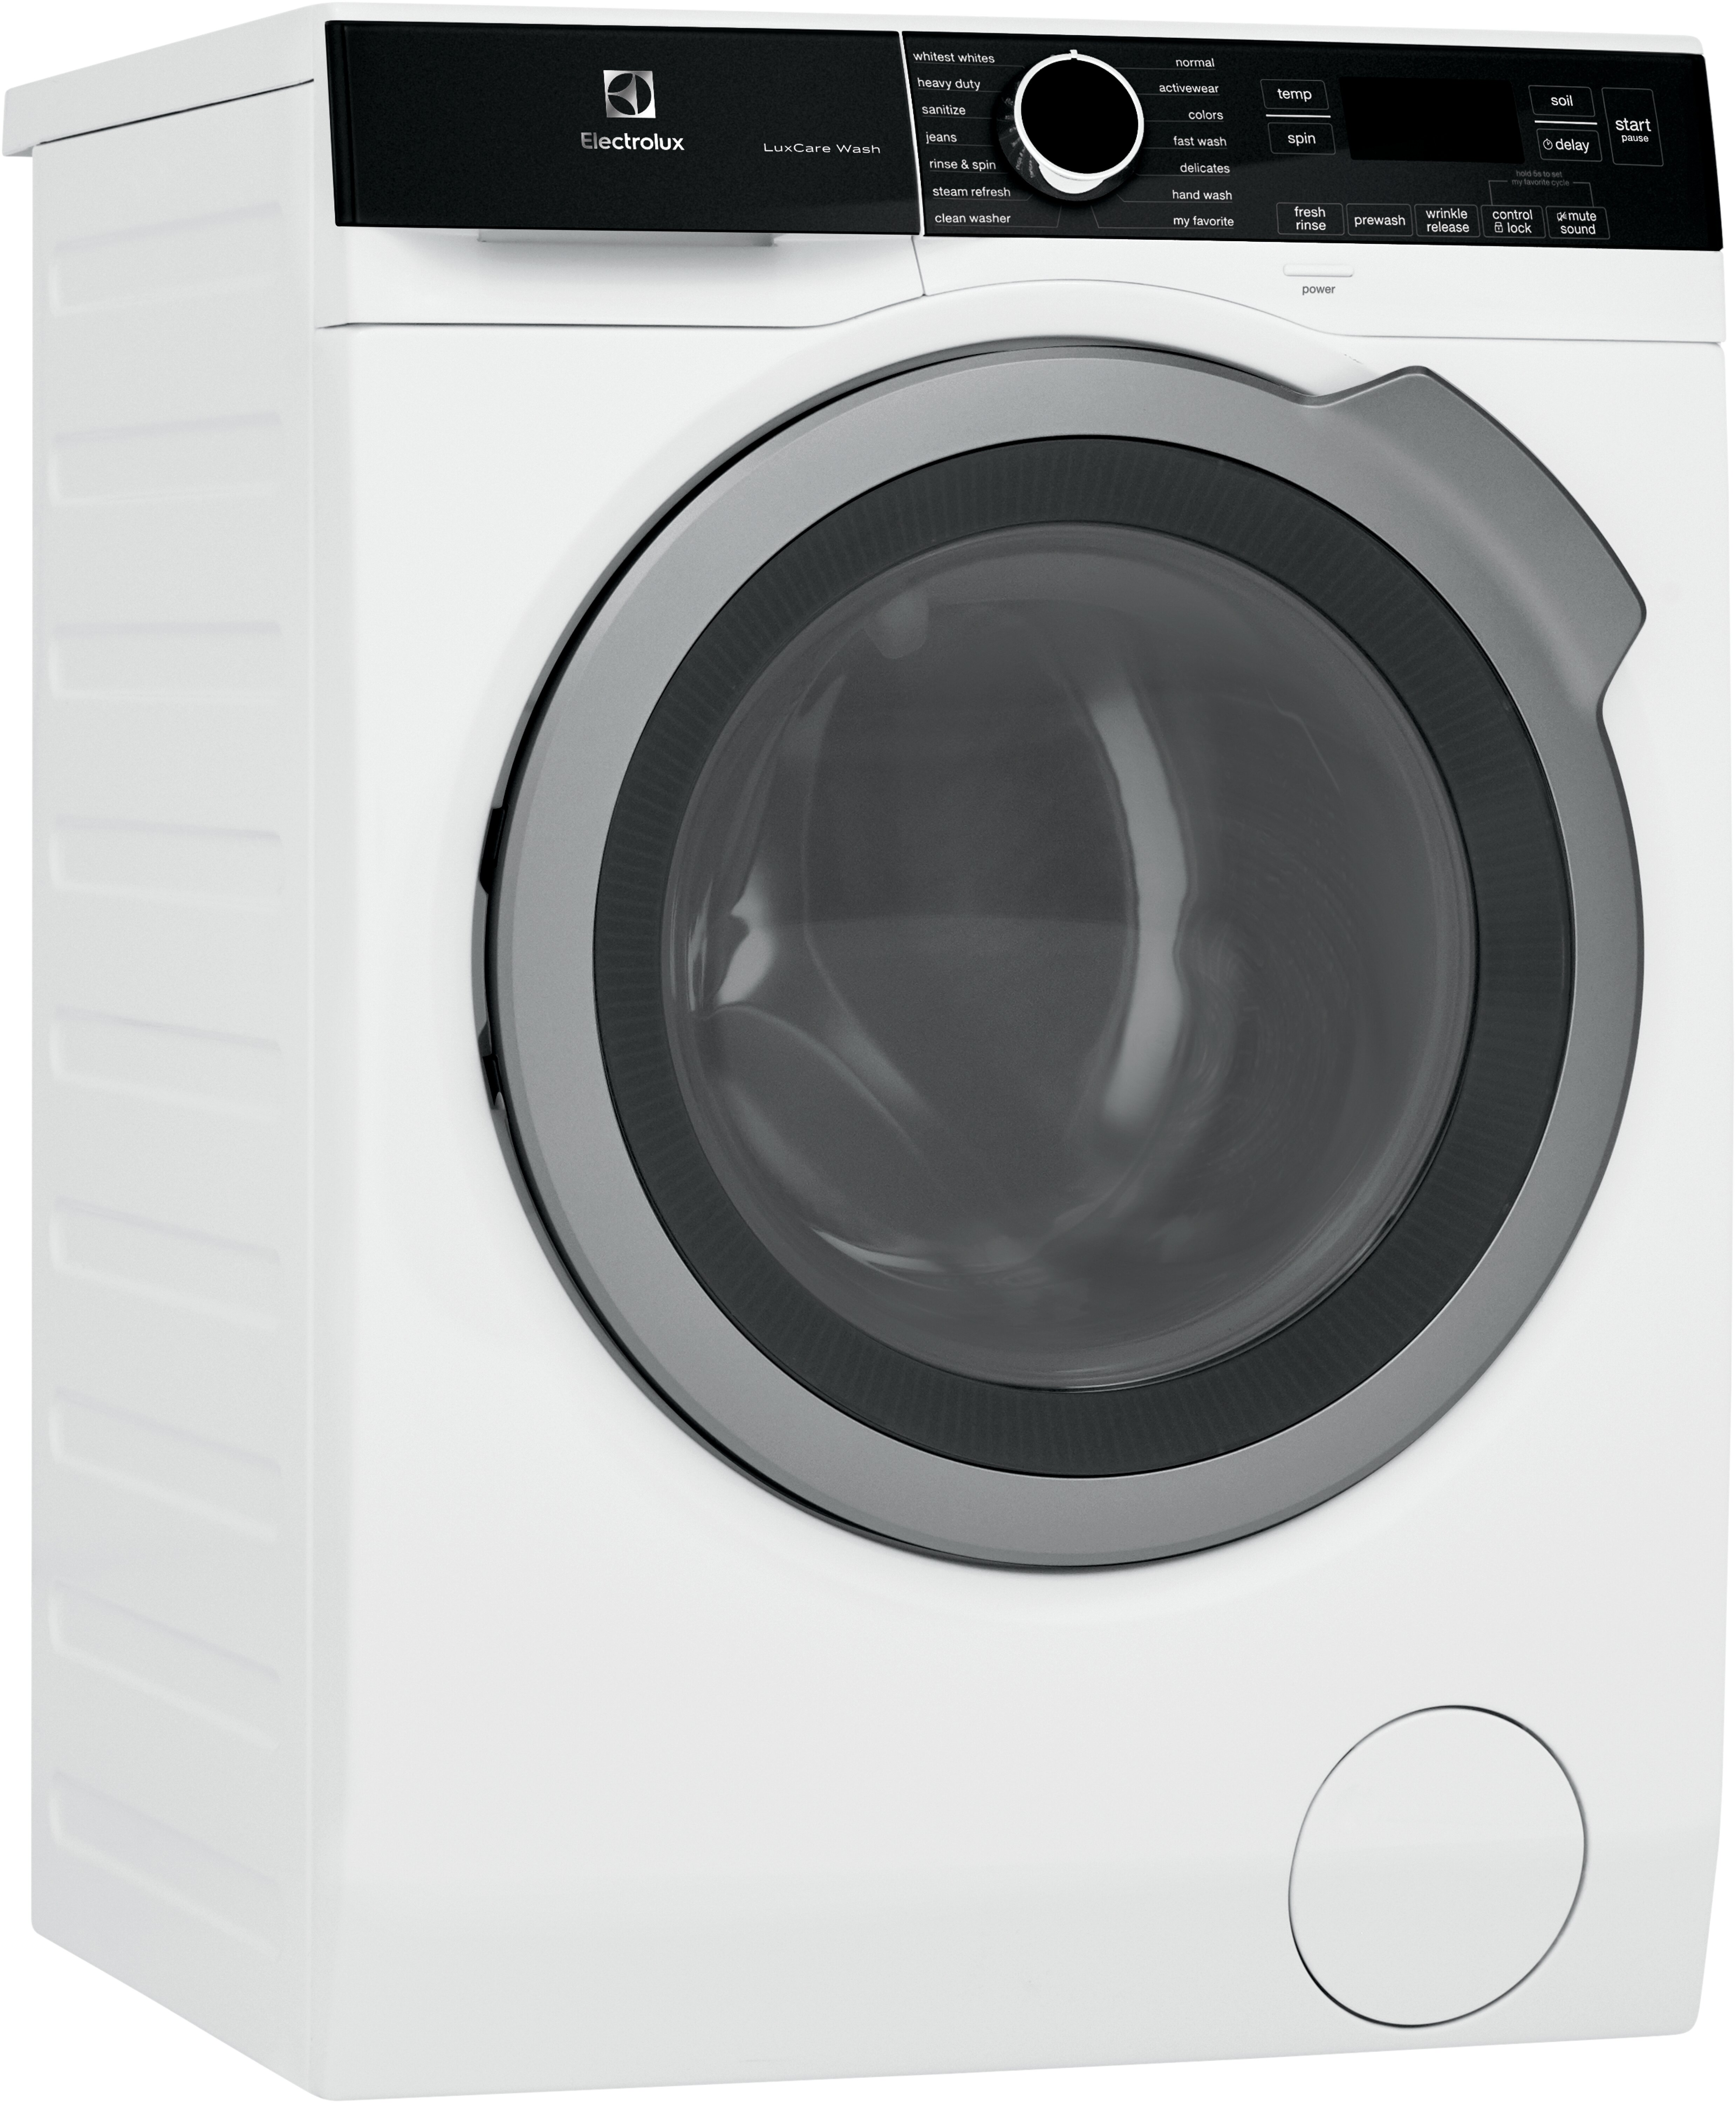 Frigidaire High Efficiency Stackable Front-Load Washer (White) ENERGY STAR  at